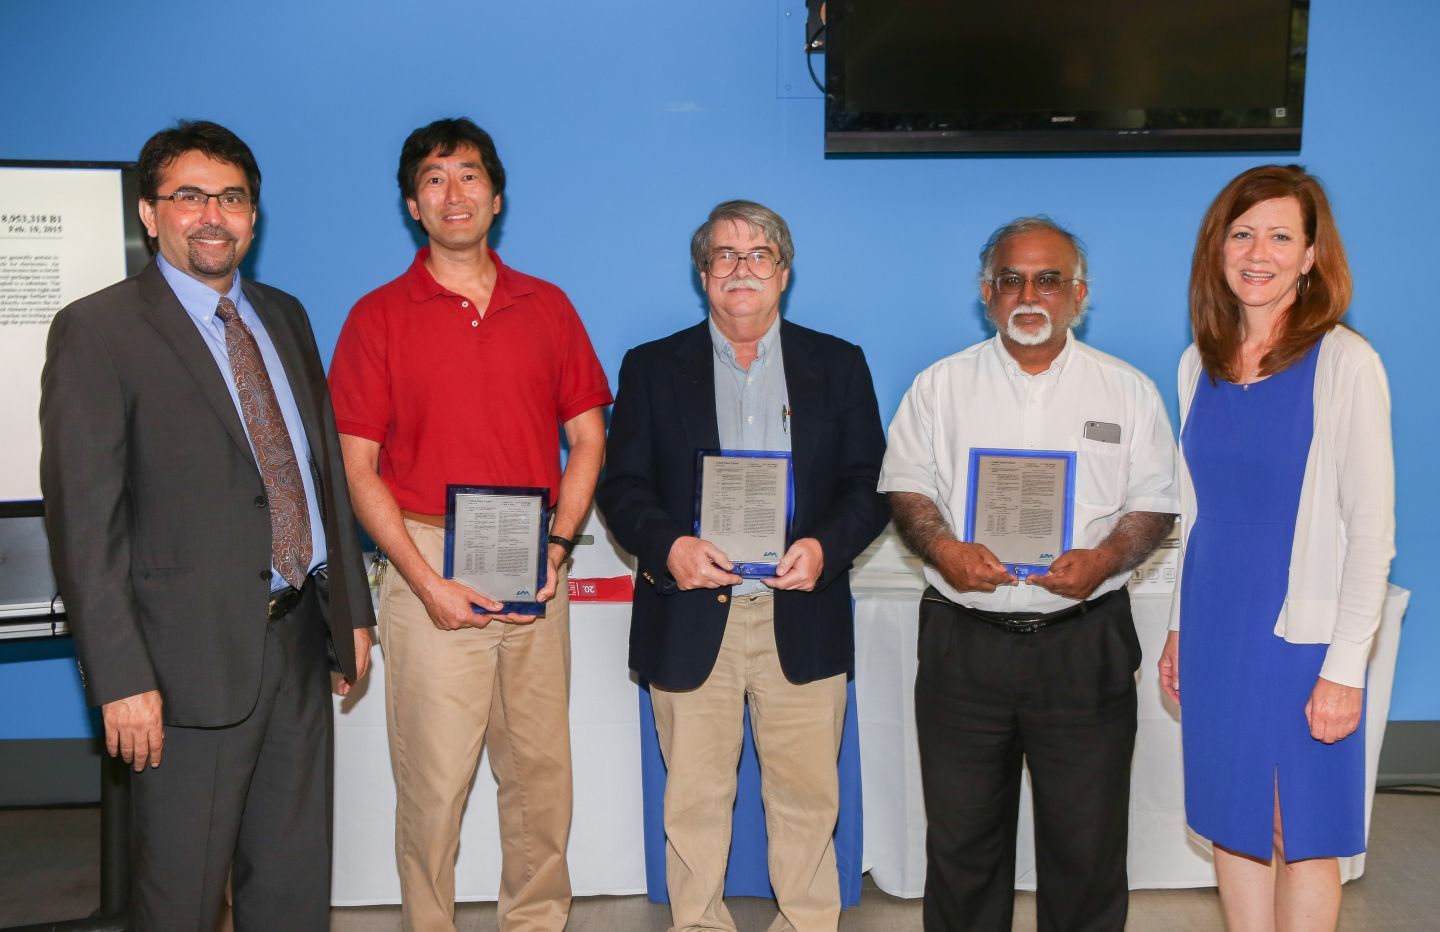 OTC Director Kannan Grant and Research Program Coordinator Becky England standing with three inventors holding patent awards